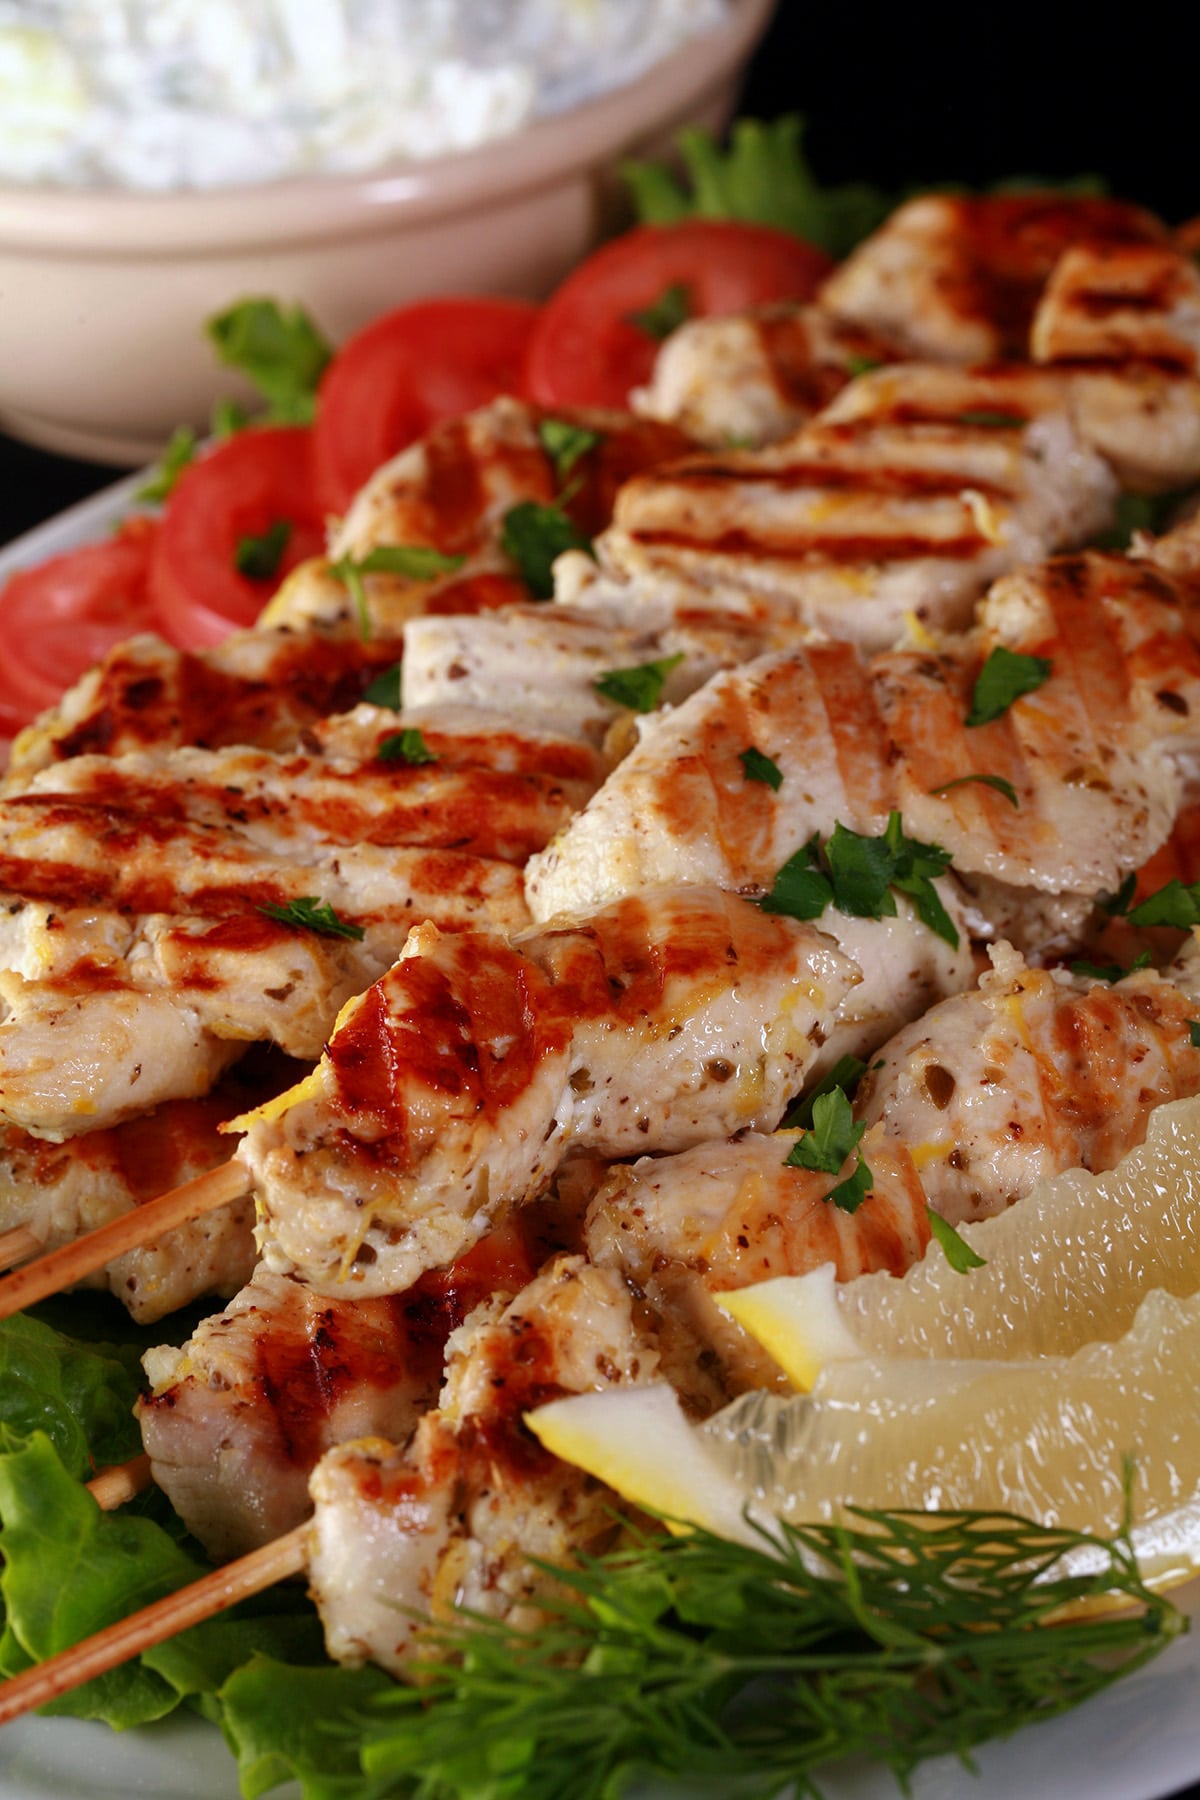 Several skewers of Green chicken souvlaki on a bed of lettuce, with tomatoes and lemon slices.